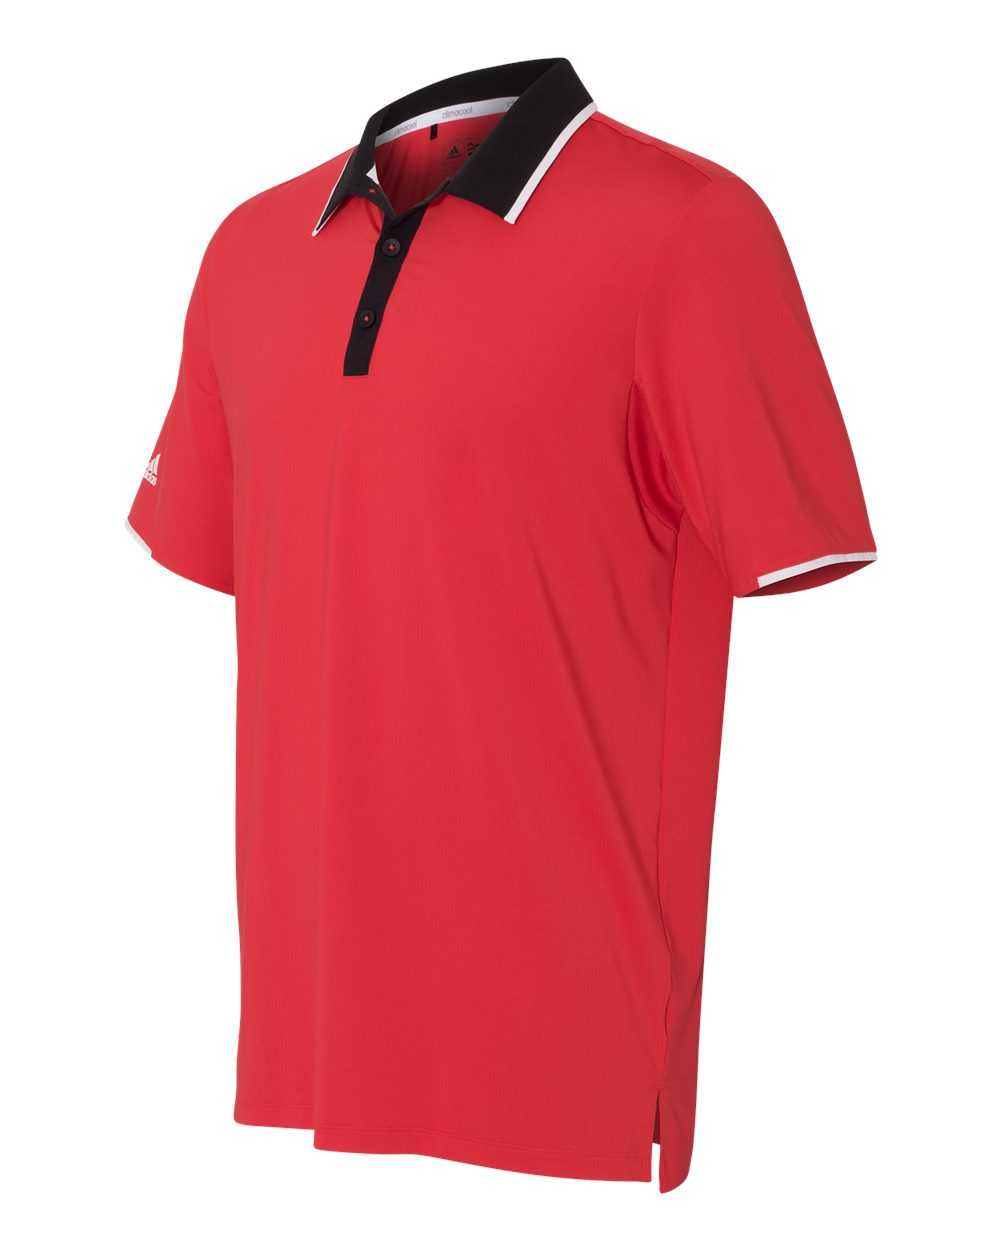 Adidas A166 Performance Colorblock Sport Shirt - Ray Red Black White - HIT a Double